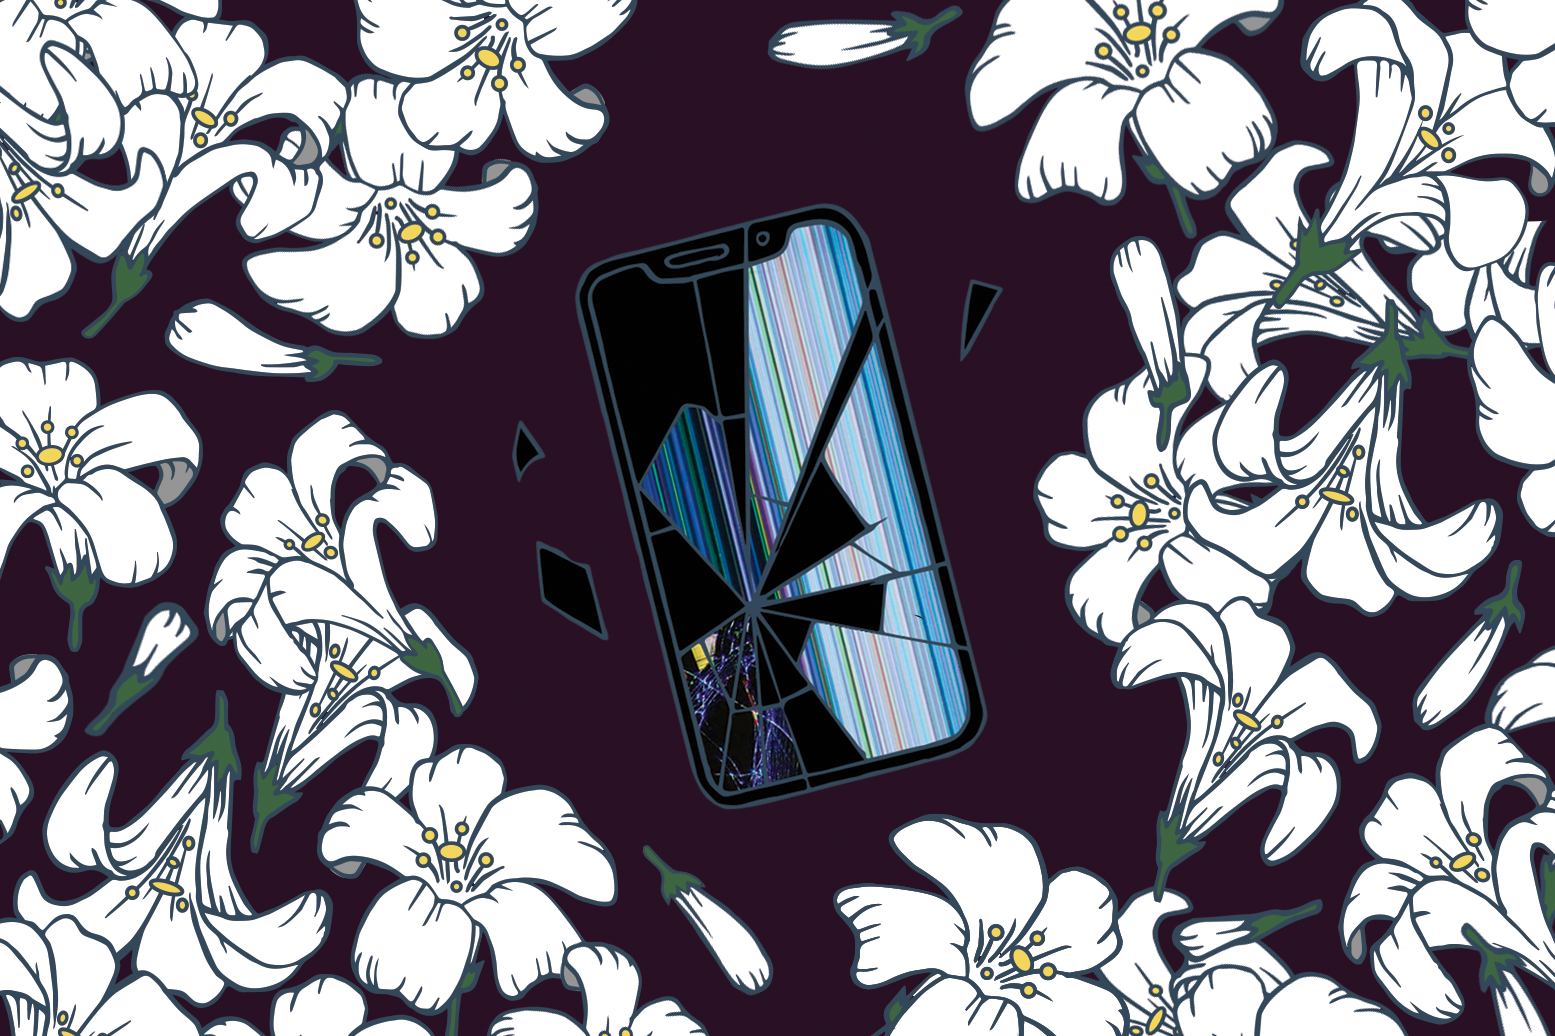 Flowers surround a cracked smartphone screen